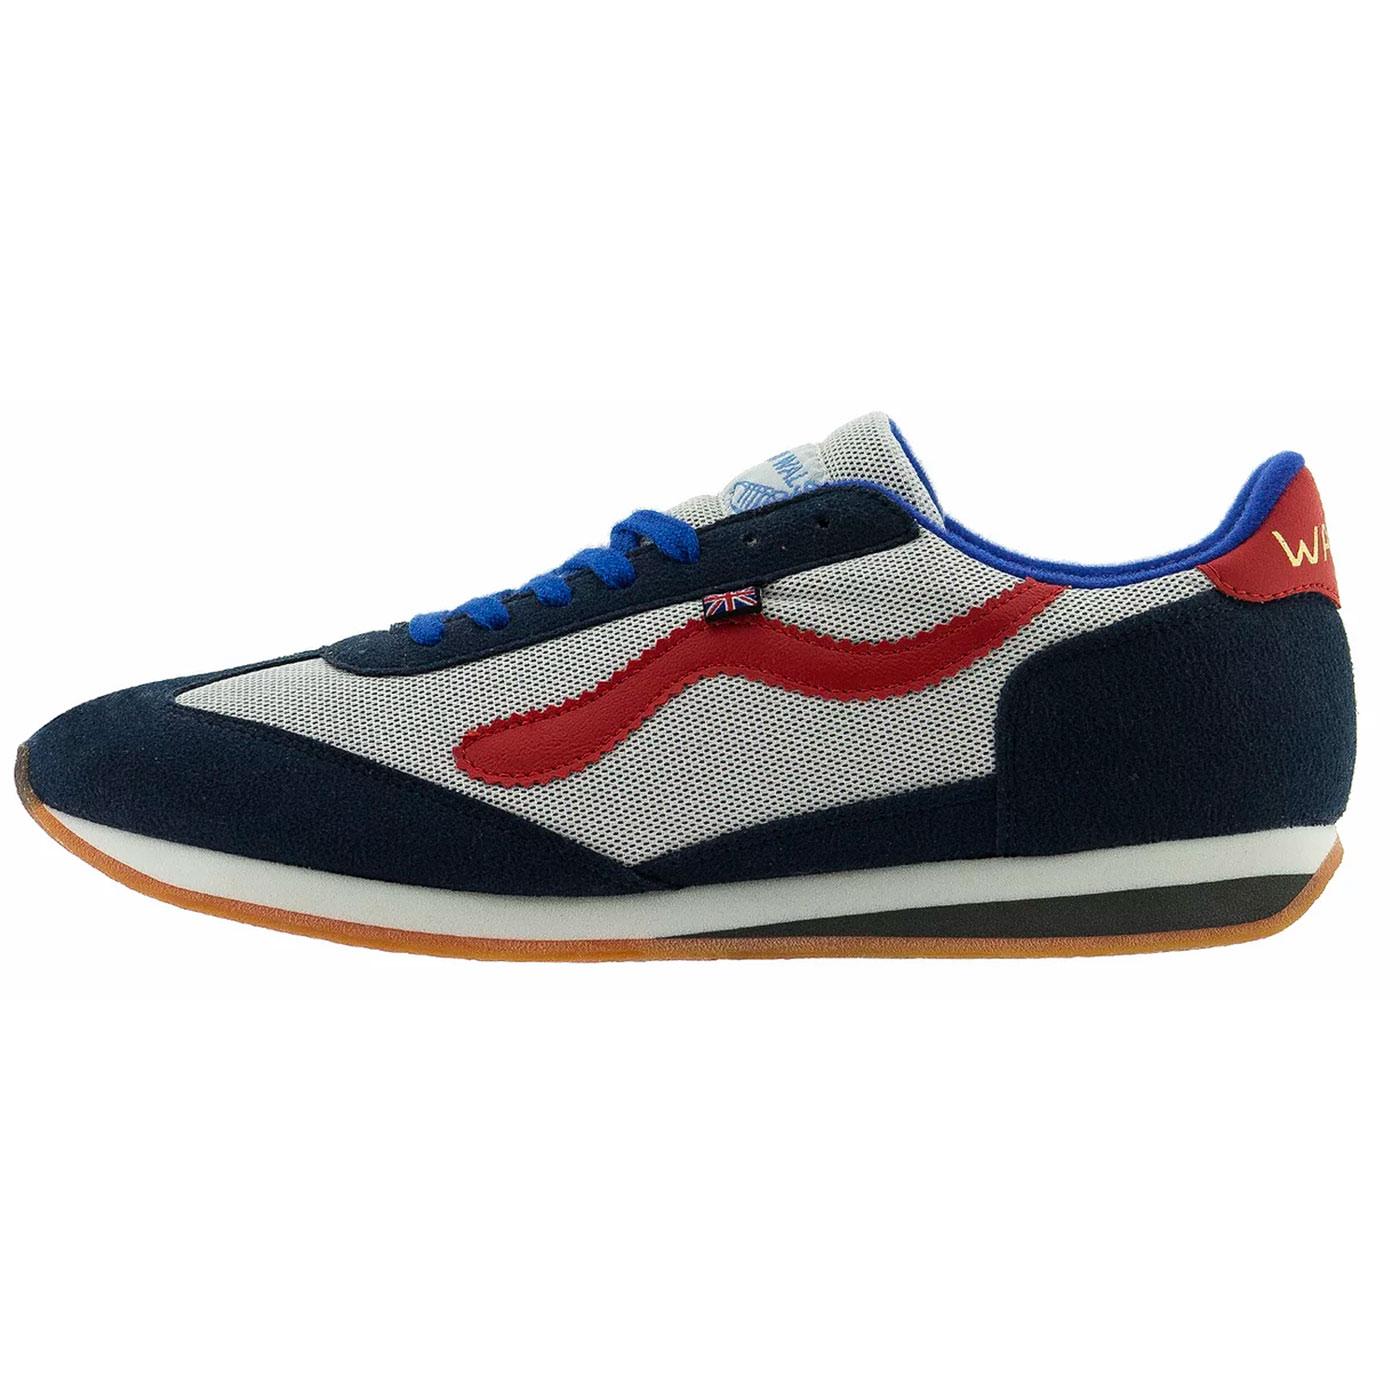 WALSH Fierce Made in England Retro Trainers White/Red/Blue